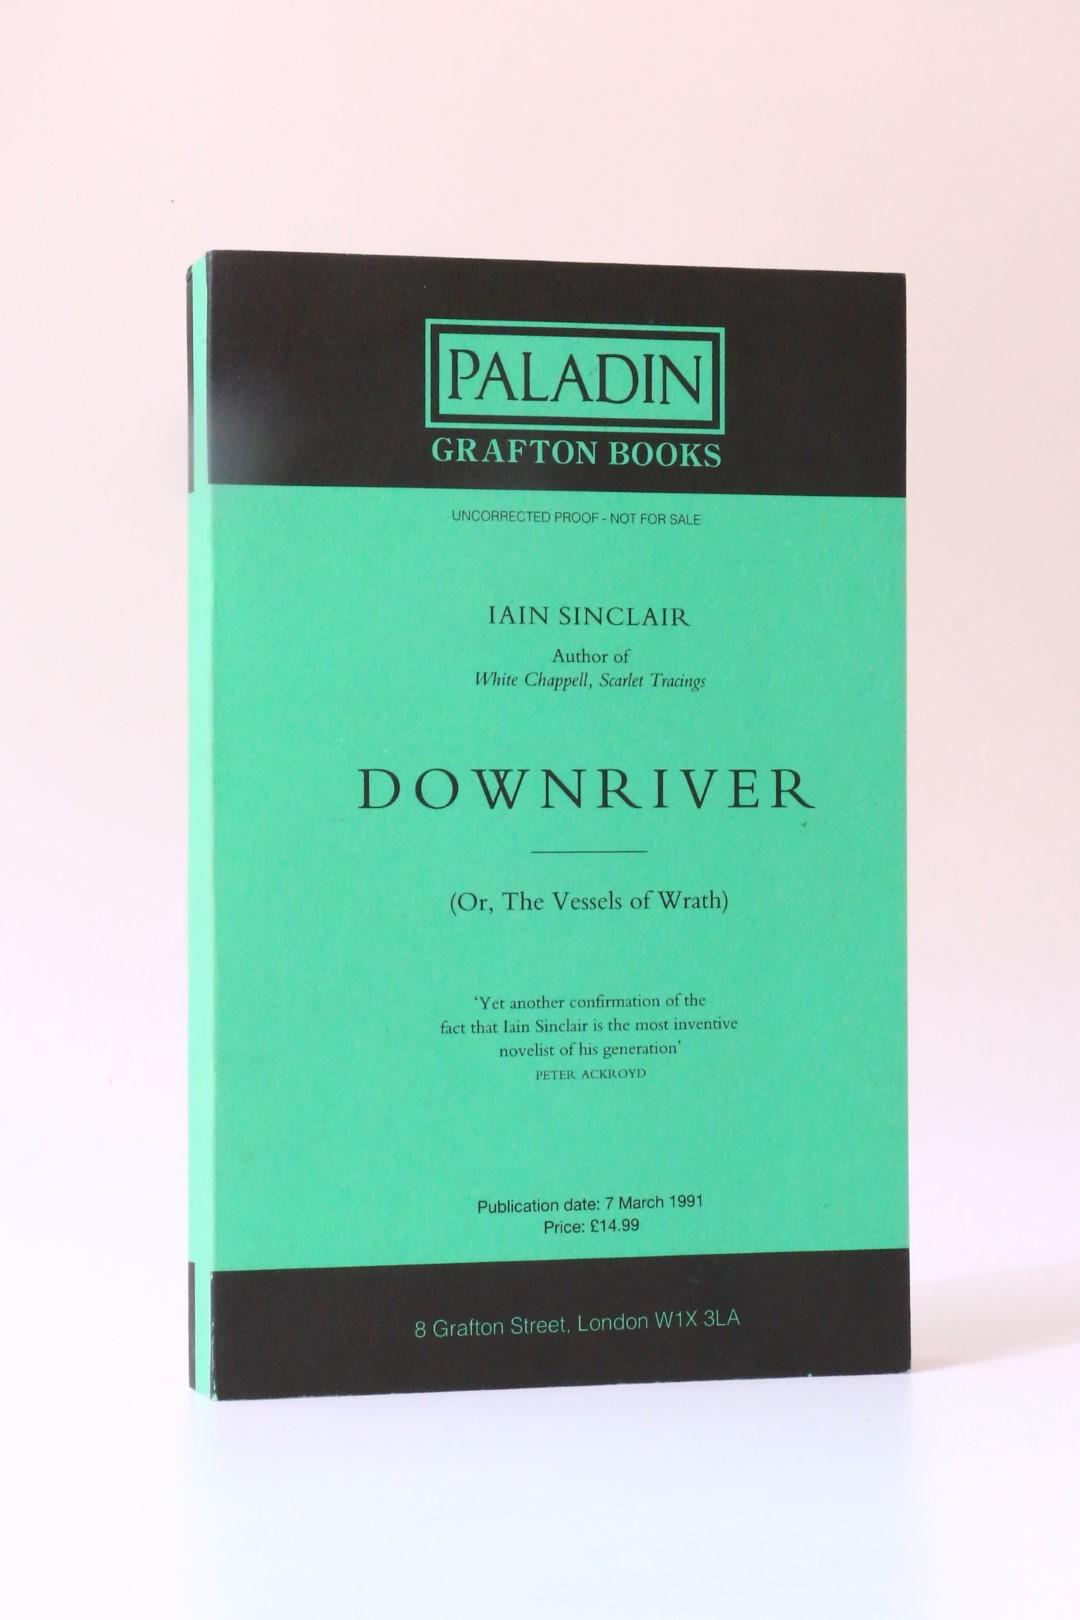 Iain Sinclair - Downriver (Or, The Vessels of Wrath) - Grafton, 1991, Proof.